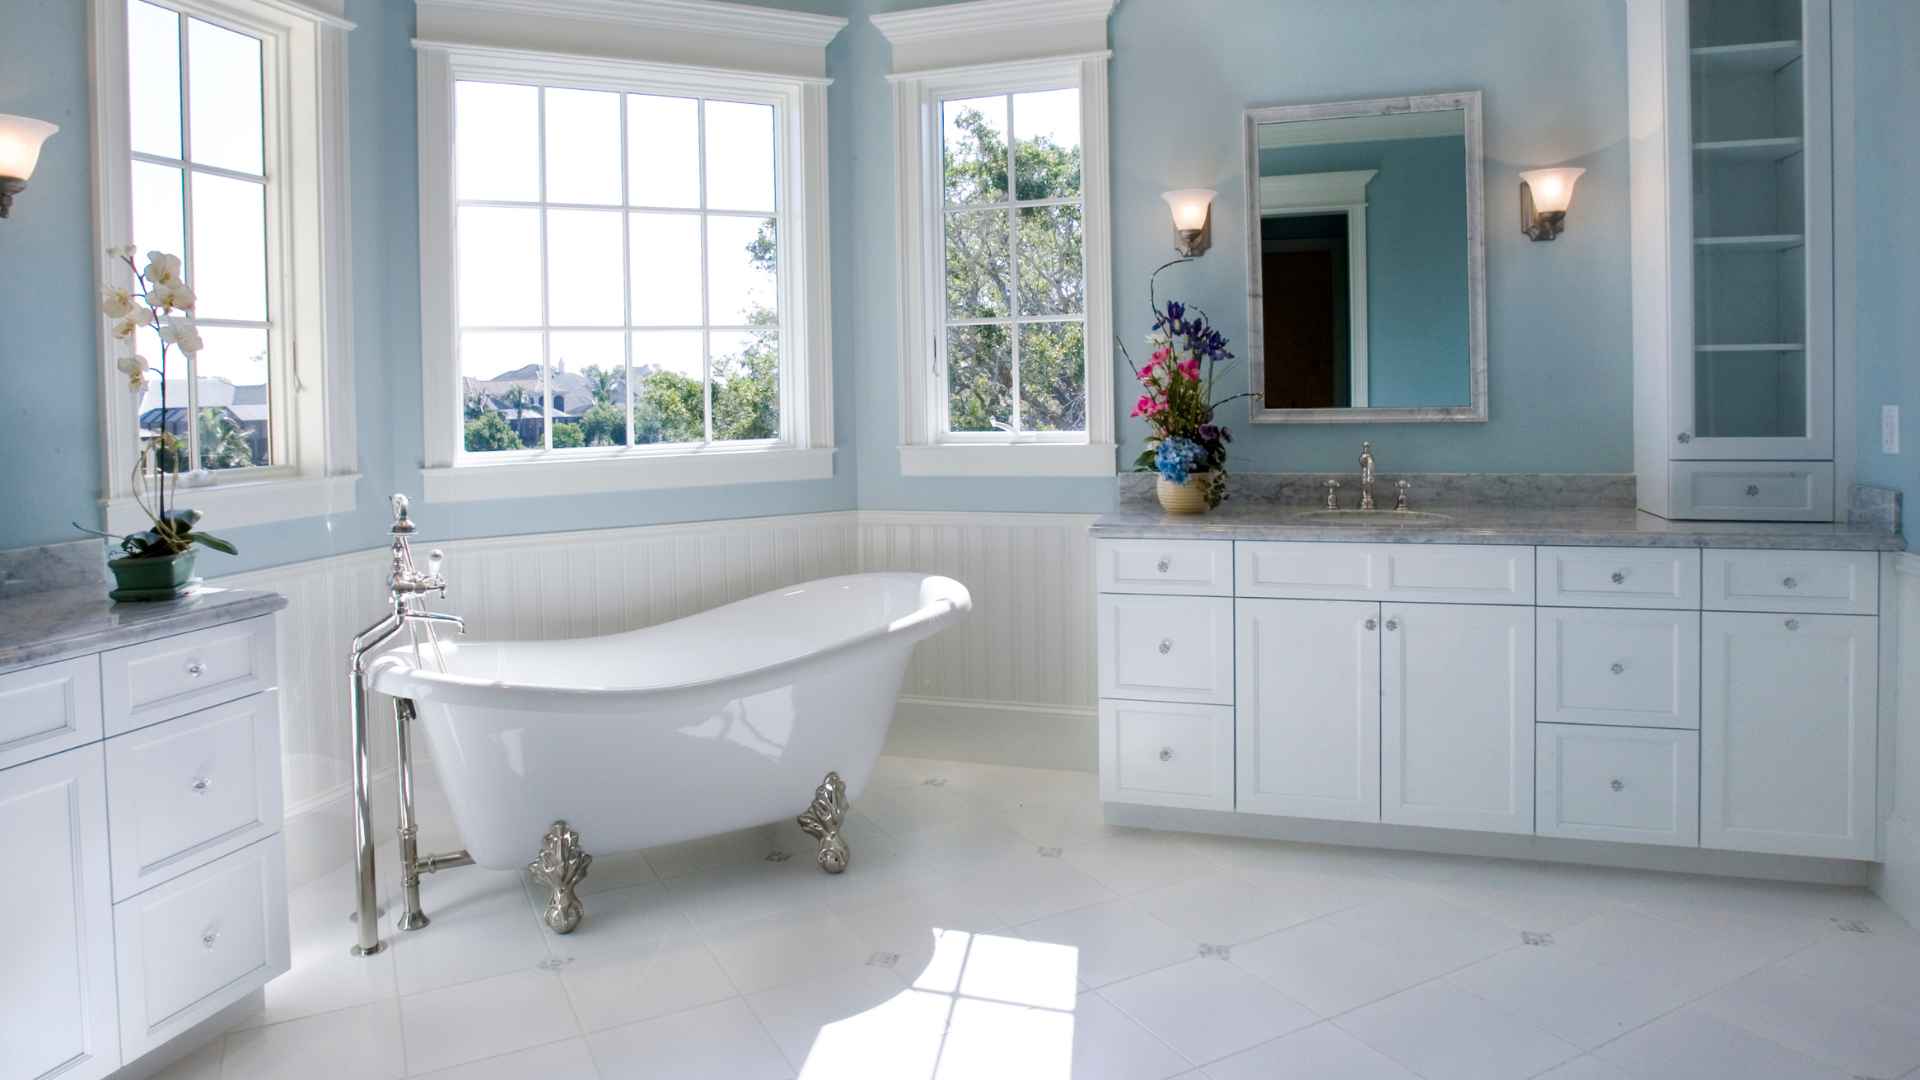 Spacious bathroom with a tub replacement, white cabinets, marble countertops, and large windows providing natural light.